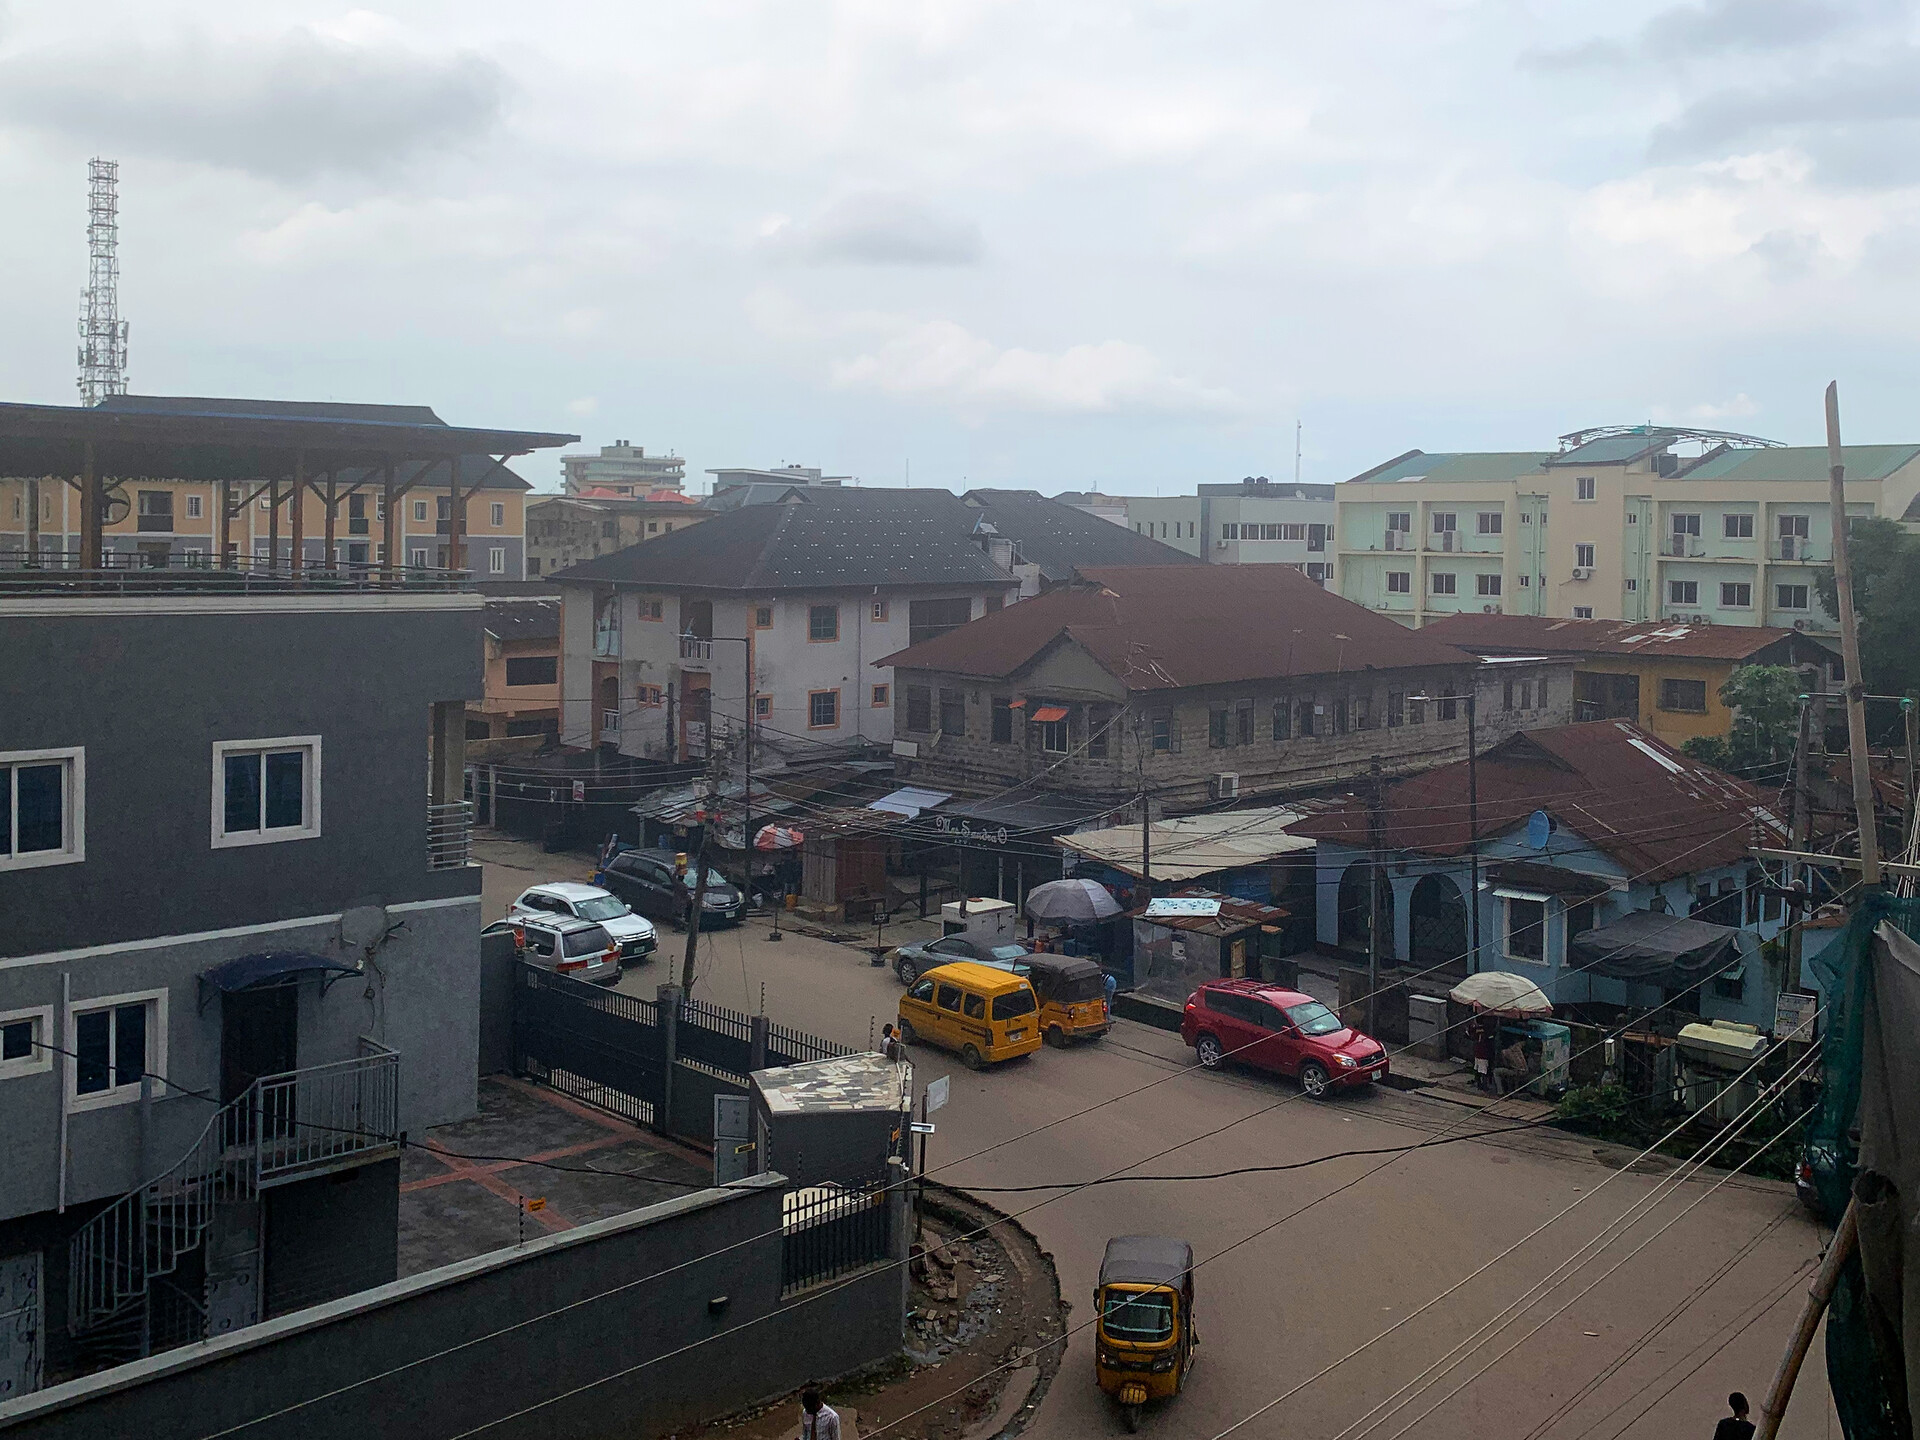 View from the CCA, Lagos. Image by author.